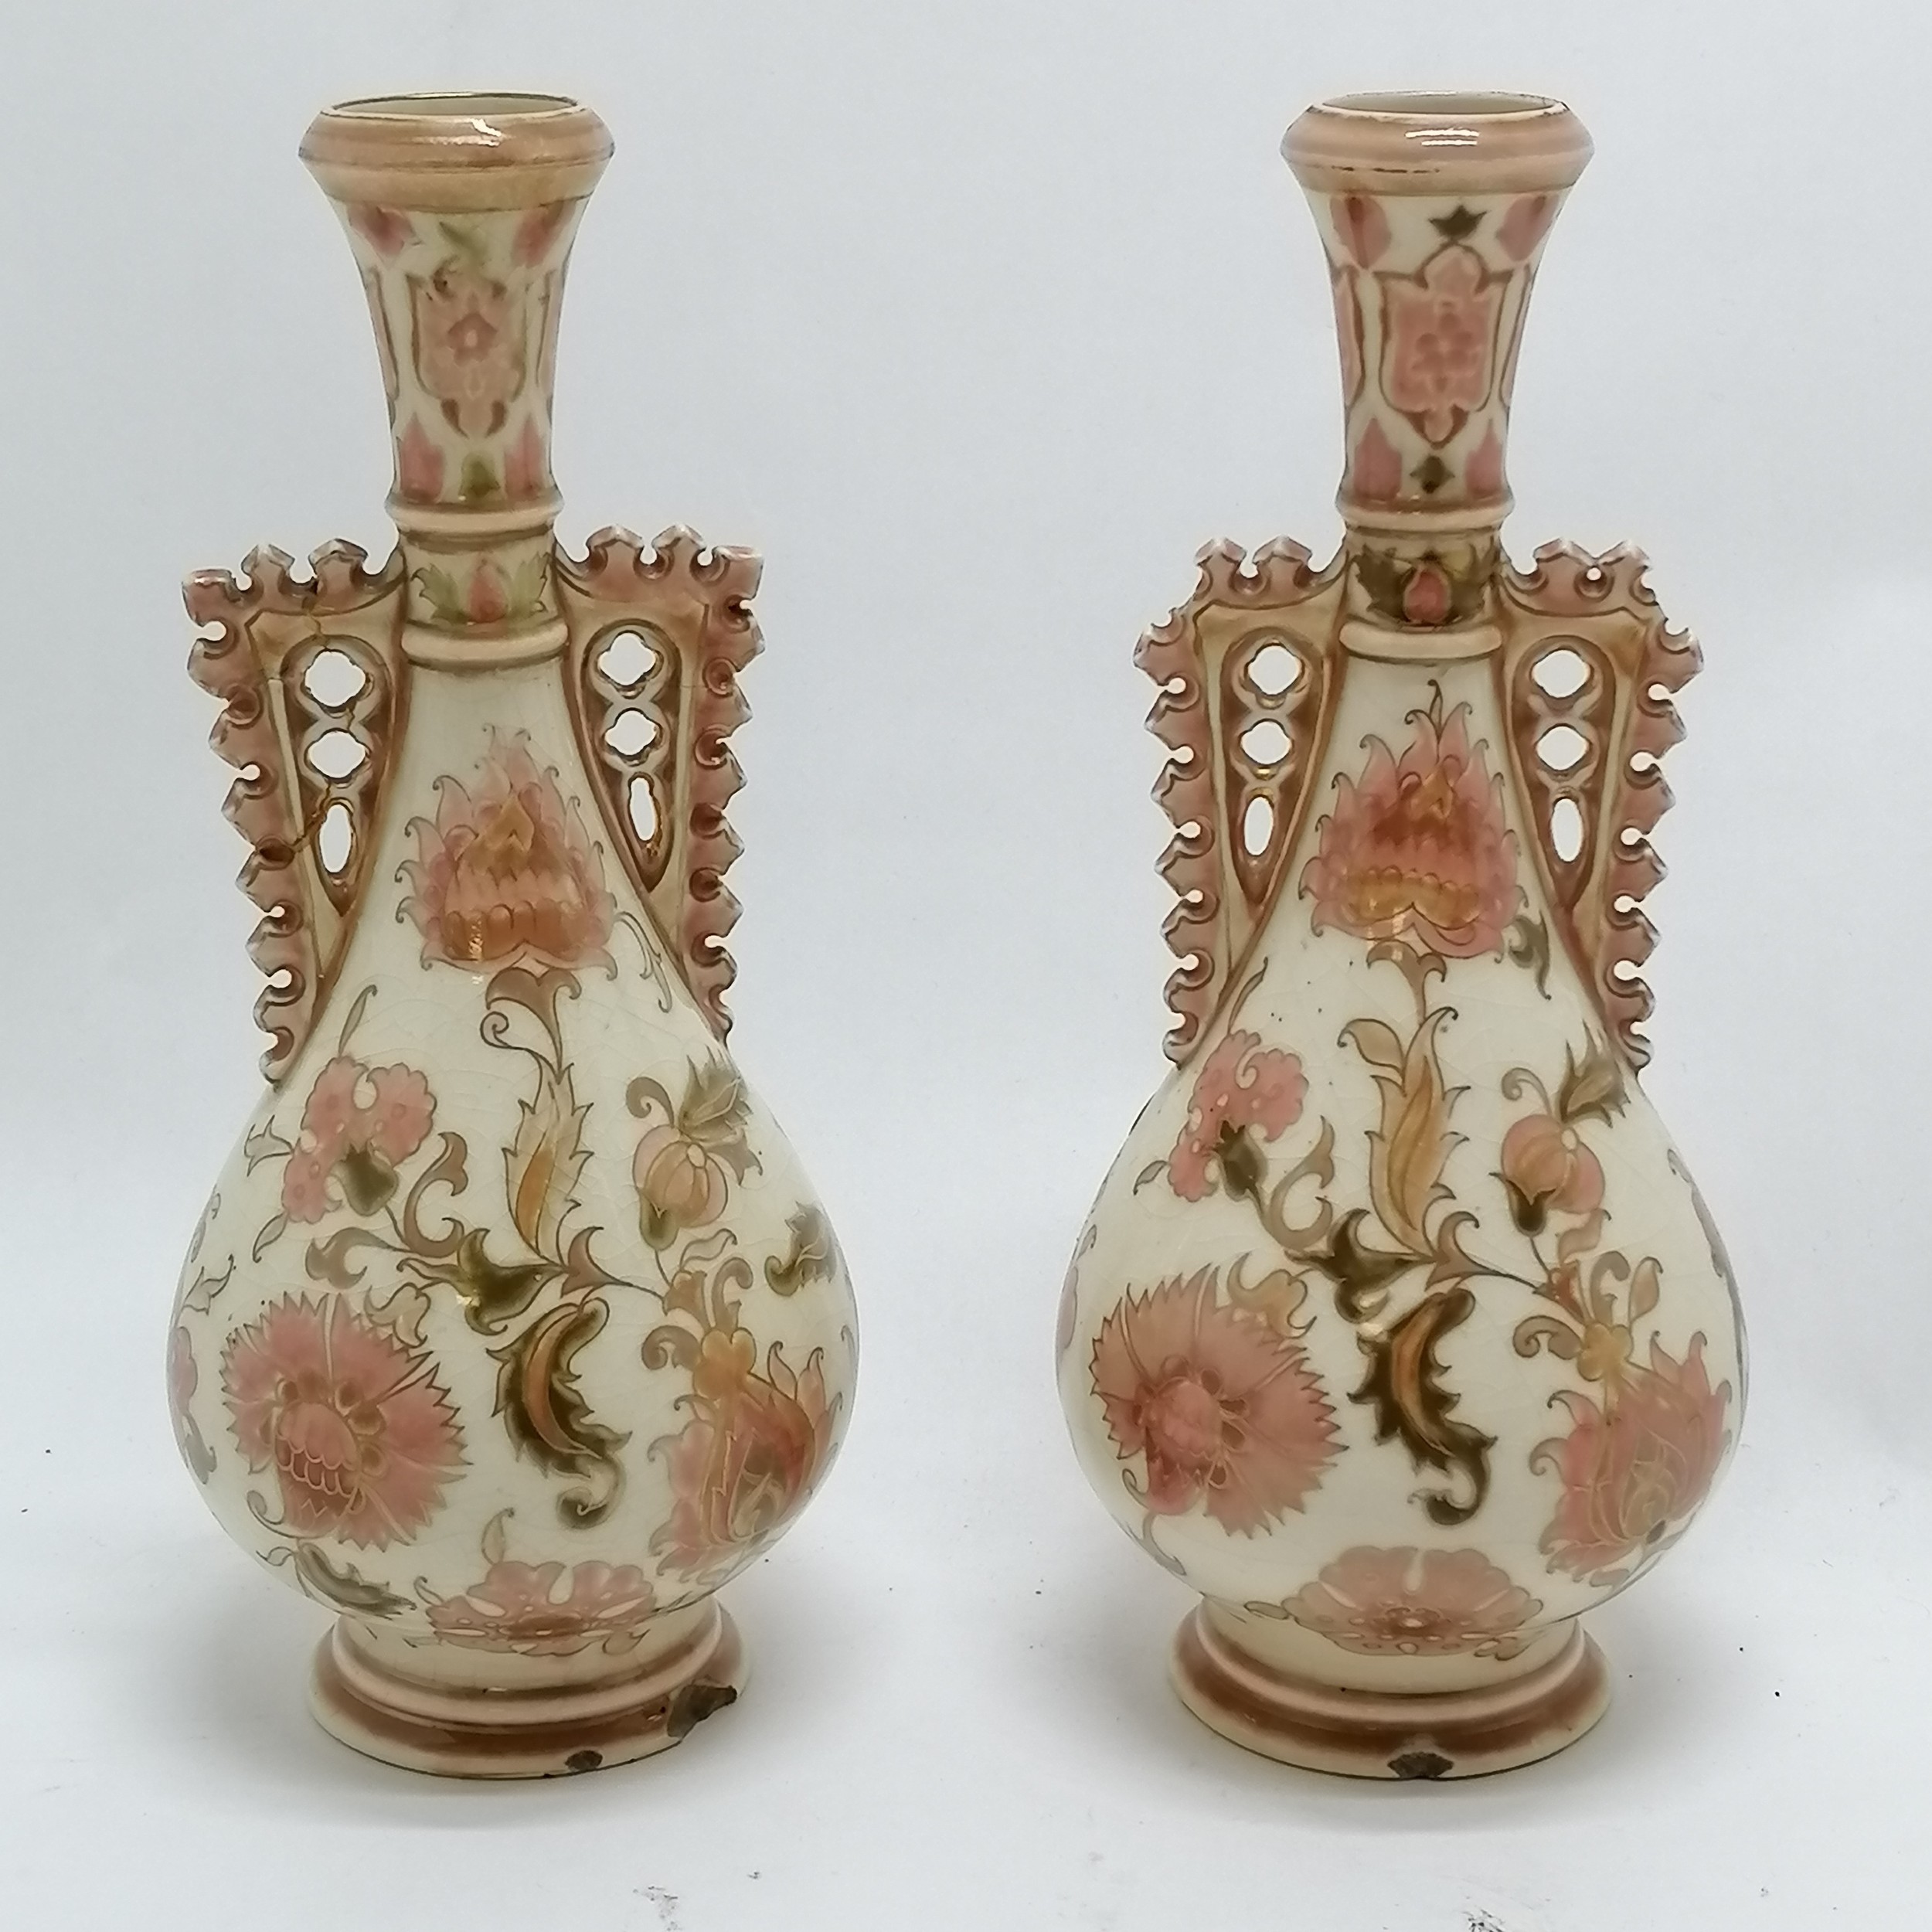 Zsolnay (Pecs, Hungary) pair of decorative vases - 21cm high & both are a/f - Image 3 of 8